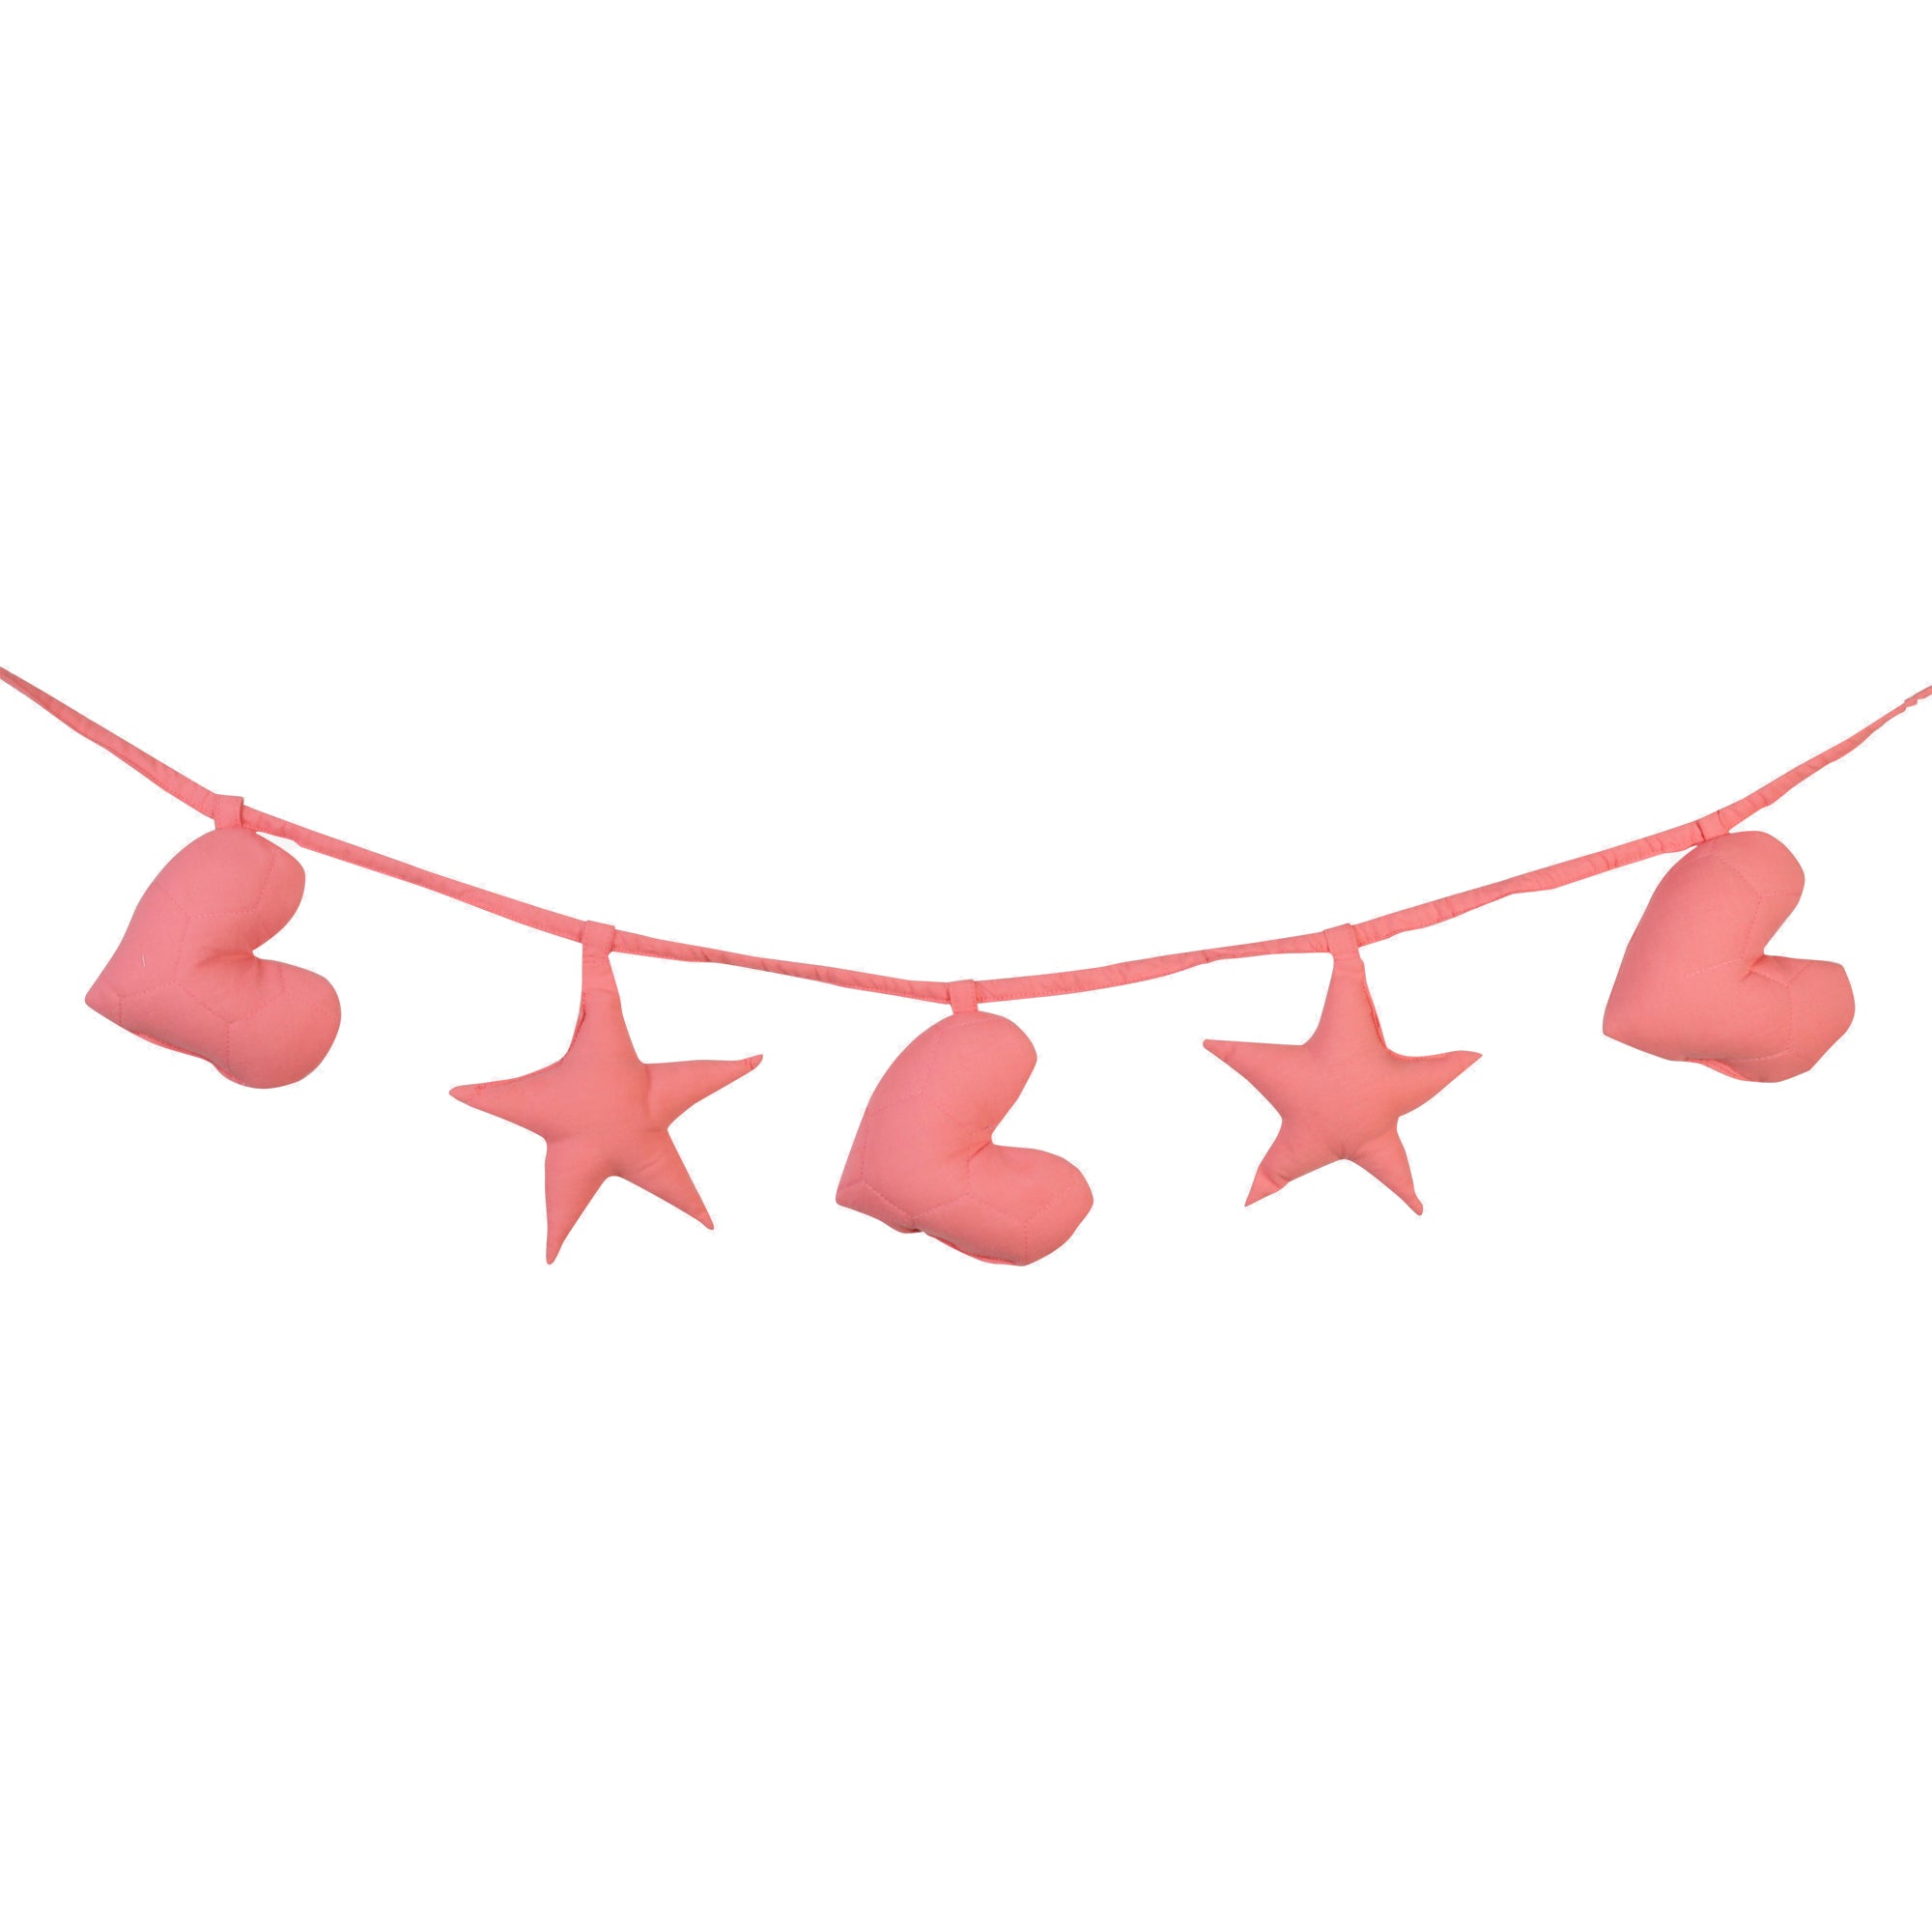 DESSERT ROSE HEART AND STAR BUNTING